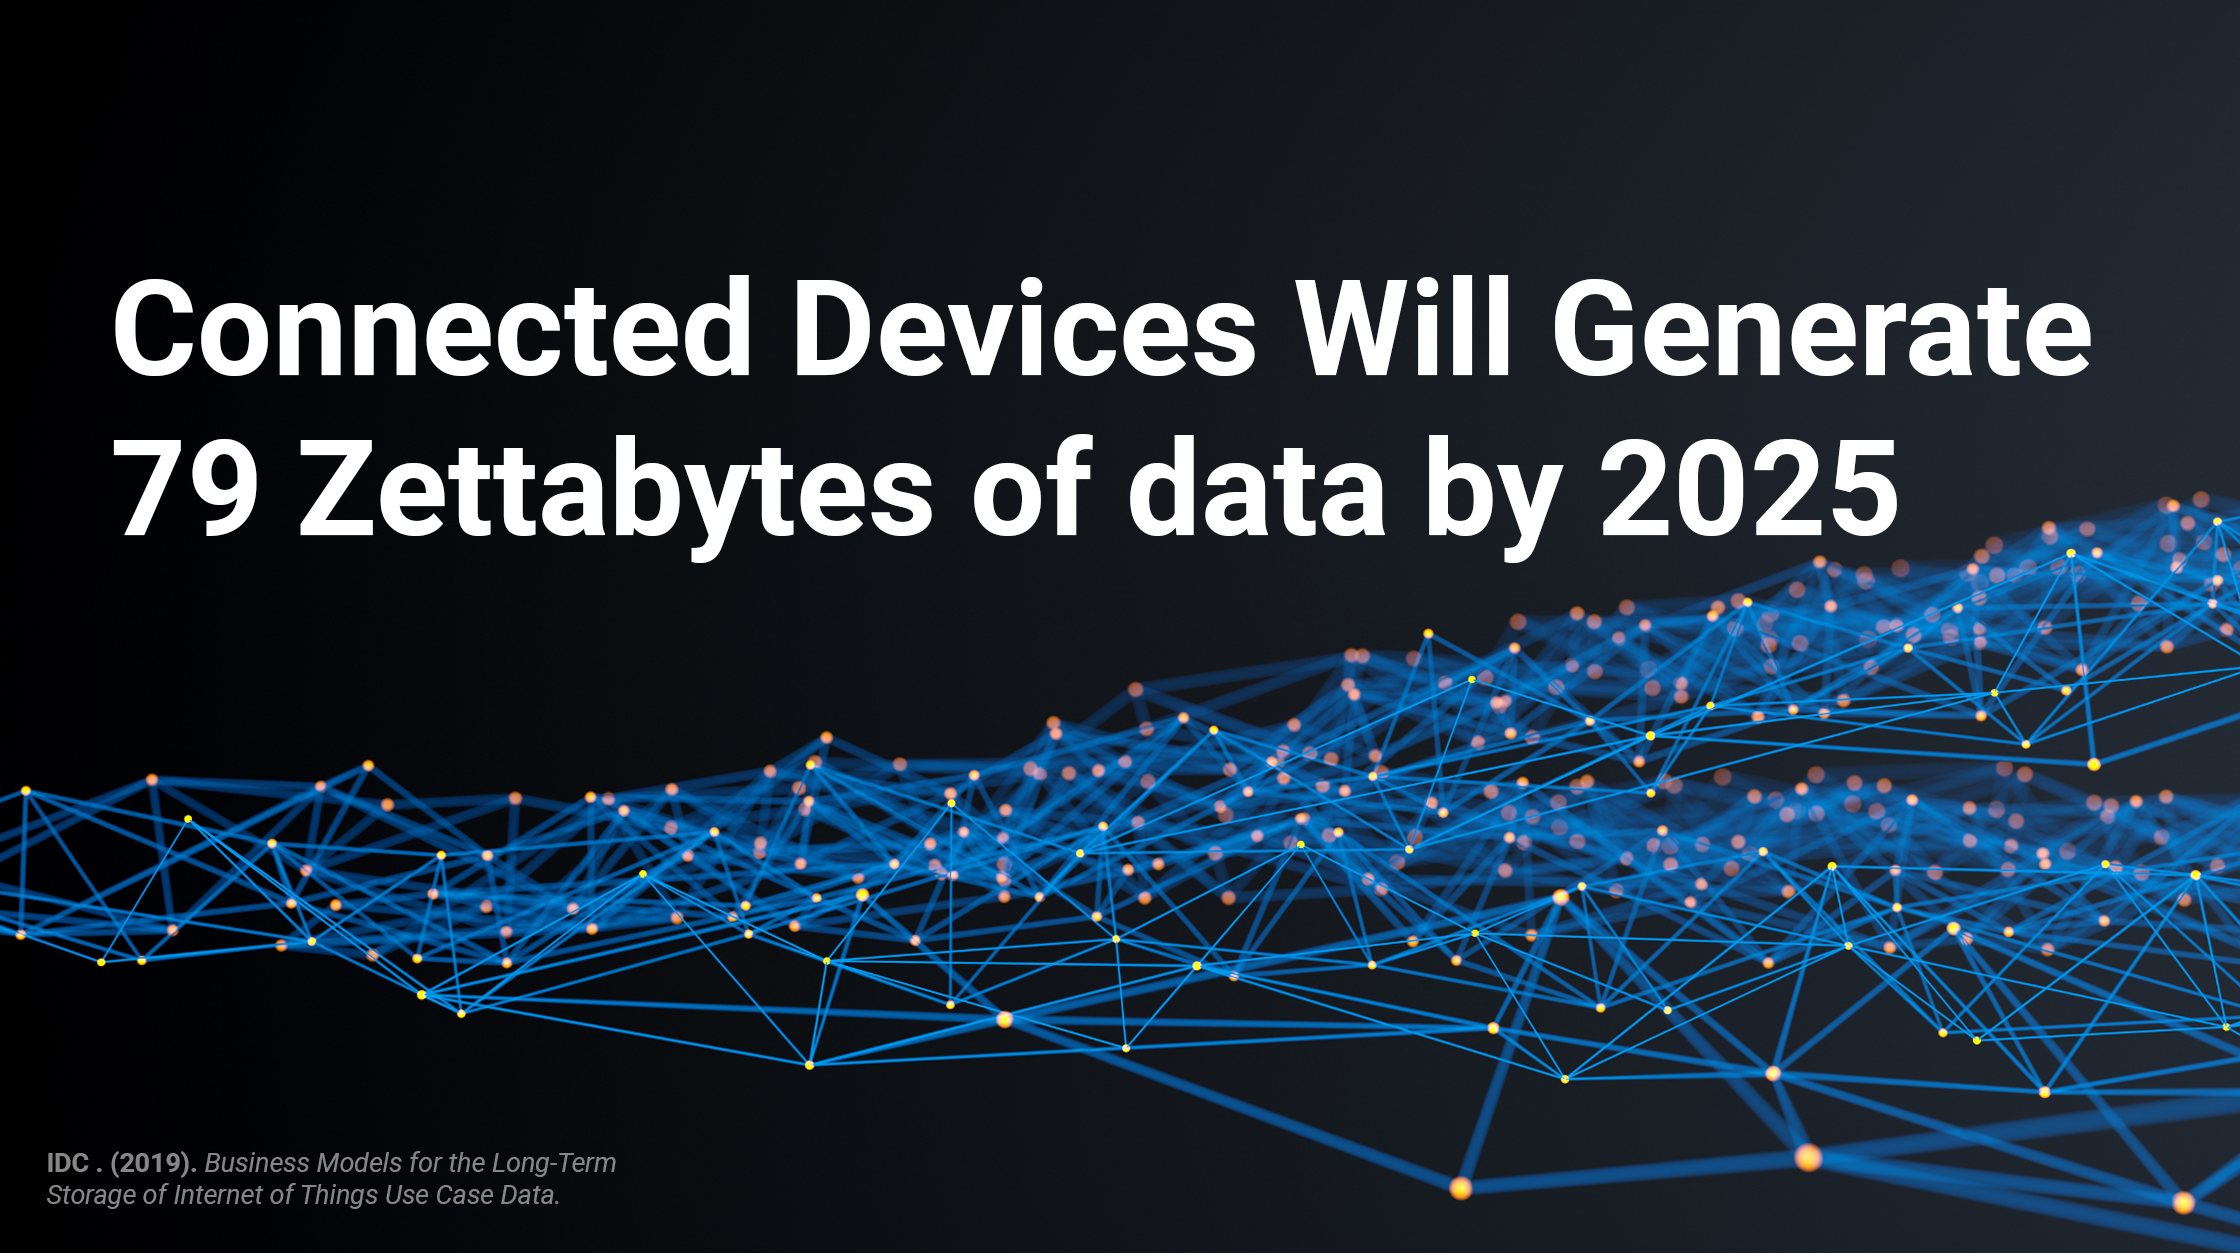 Connected Devices Will Generate 79 Zettabytes of data by 2025